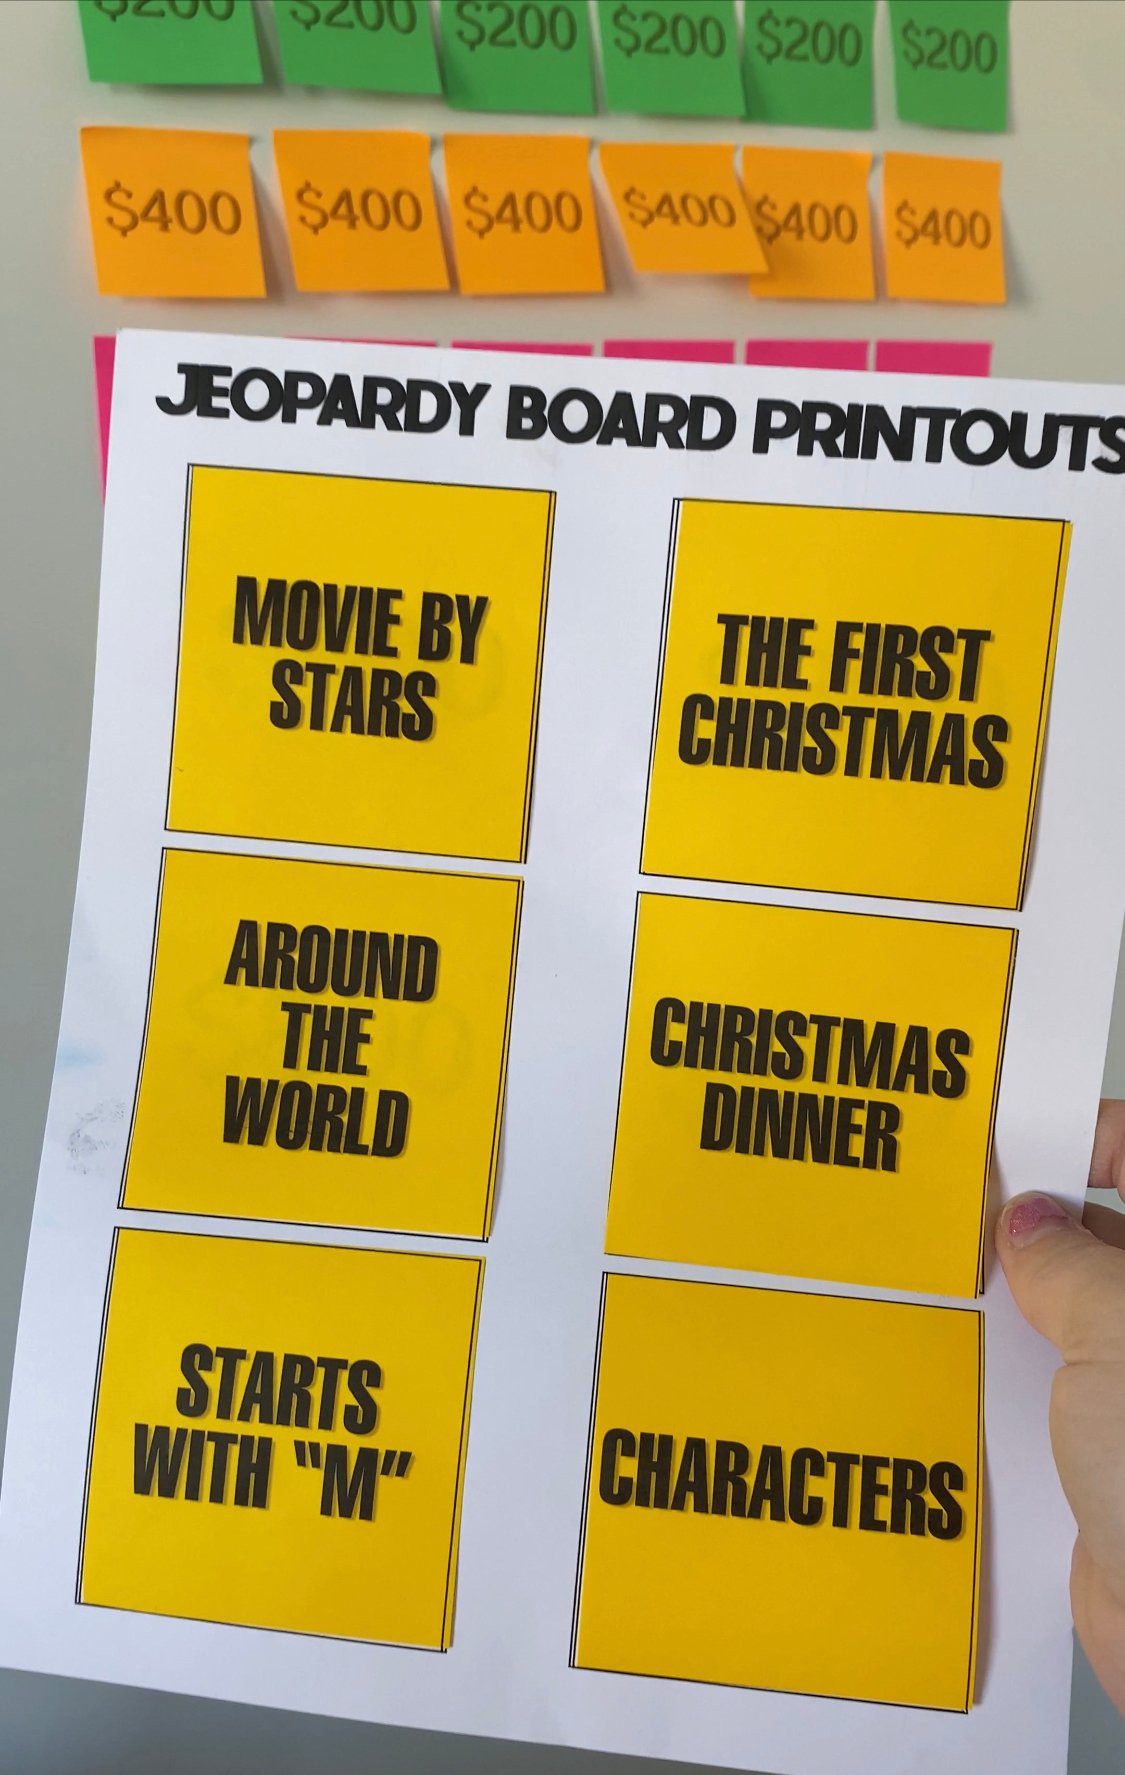 printed out Jeopardy categories on post-it notes